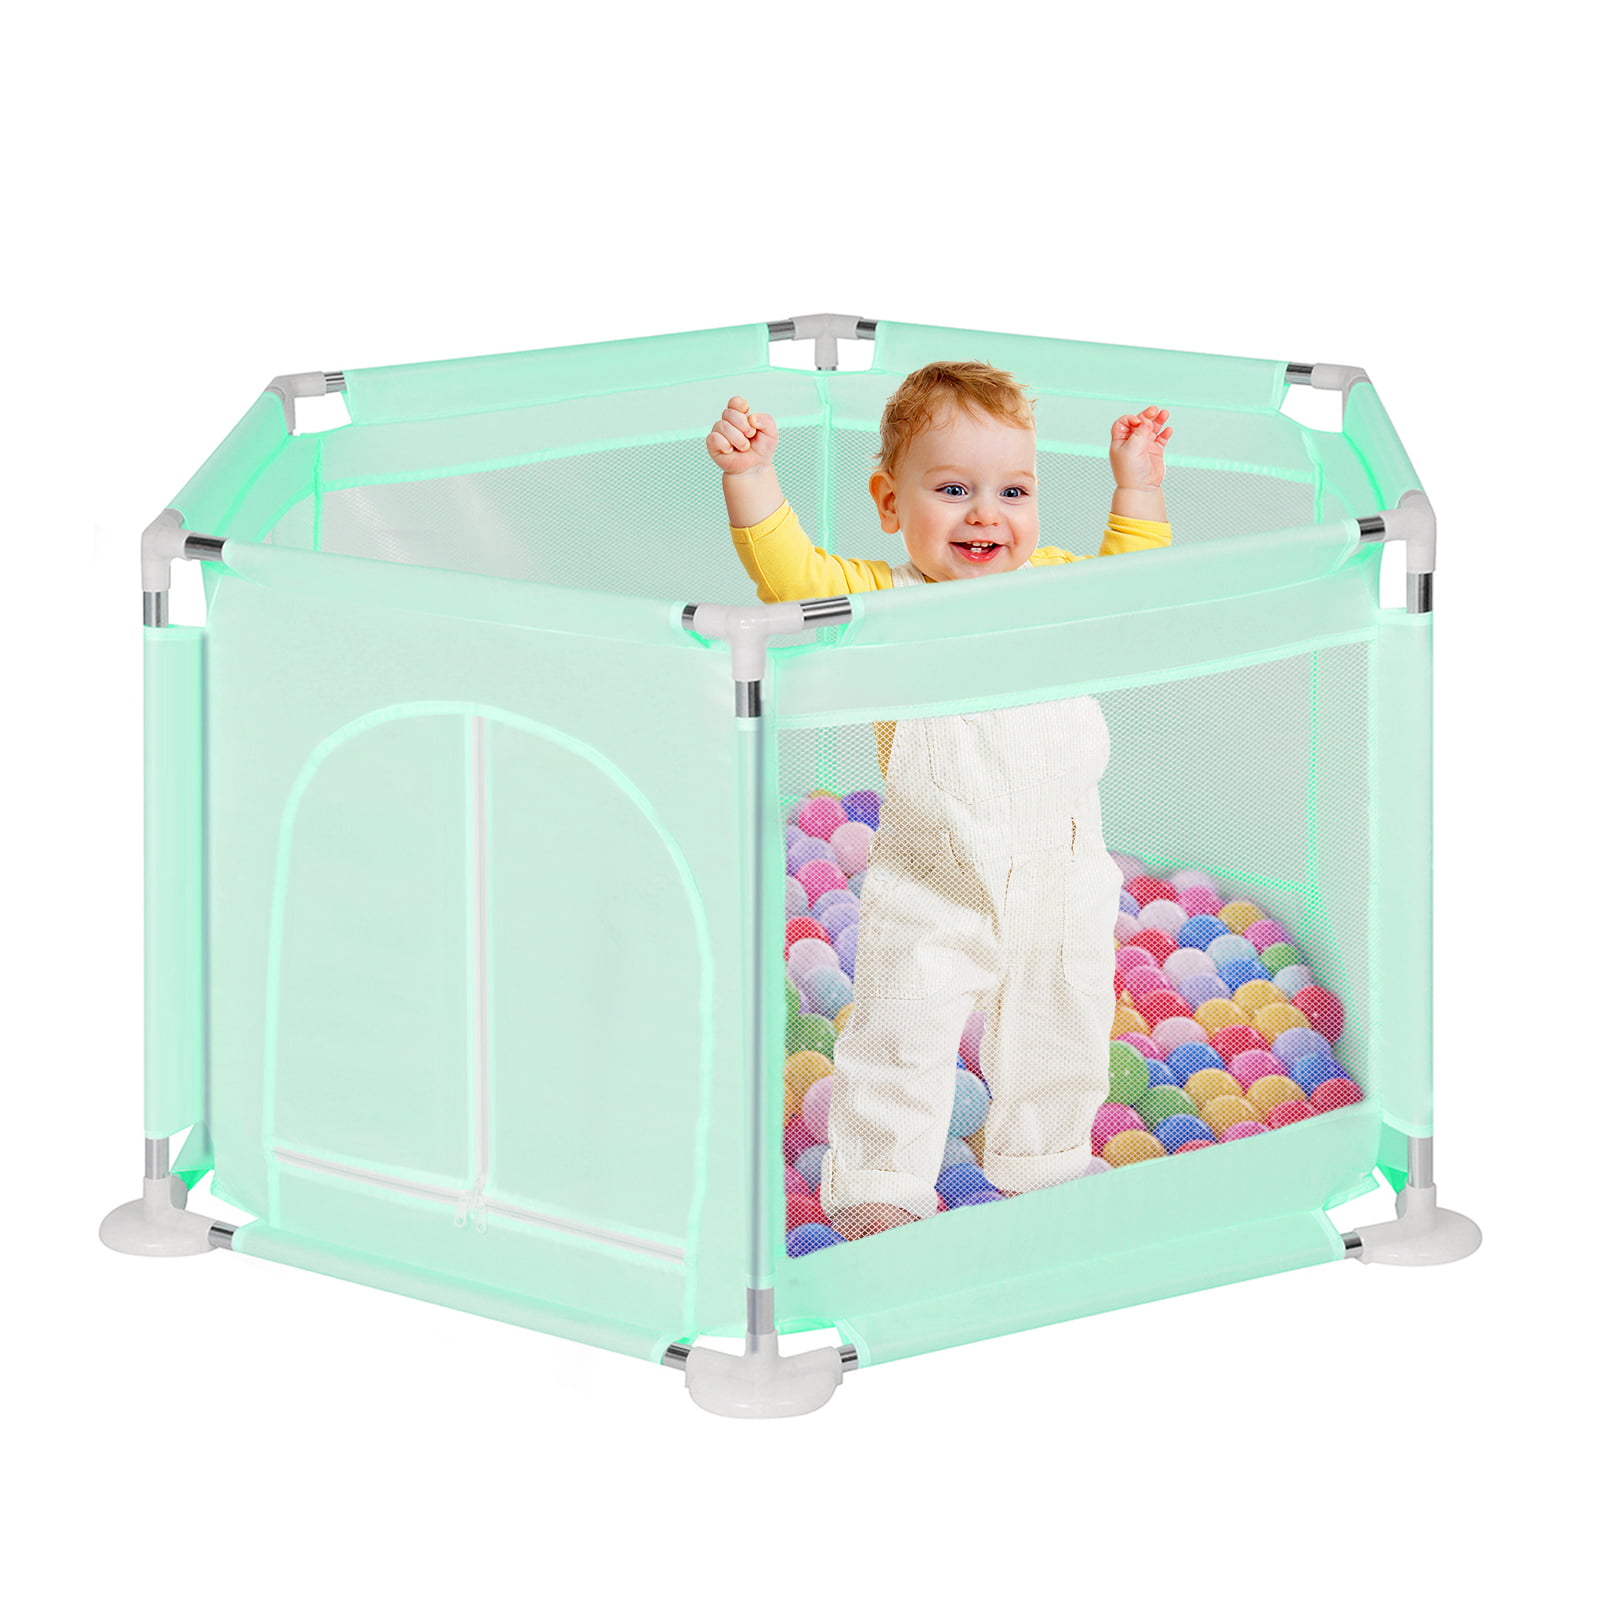 Folding Baby Playpen Kids Toddler Outdoor Indoor Play Pens Room Safety Fence 